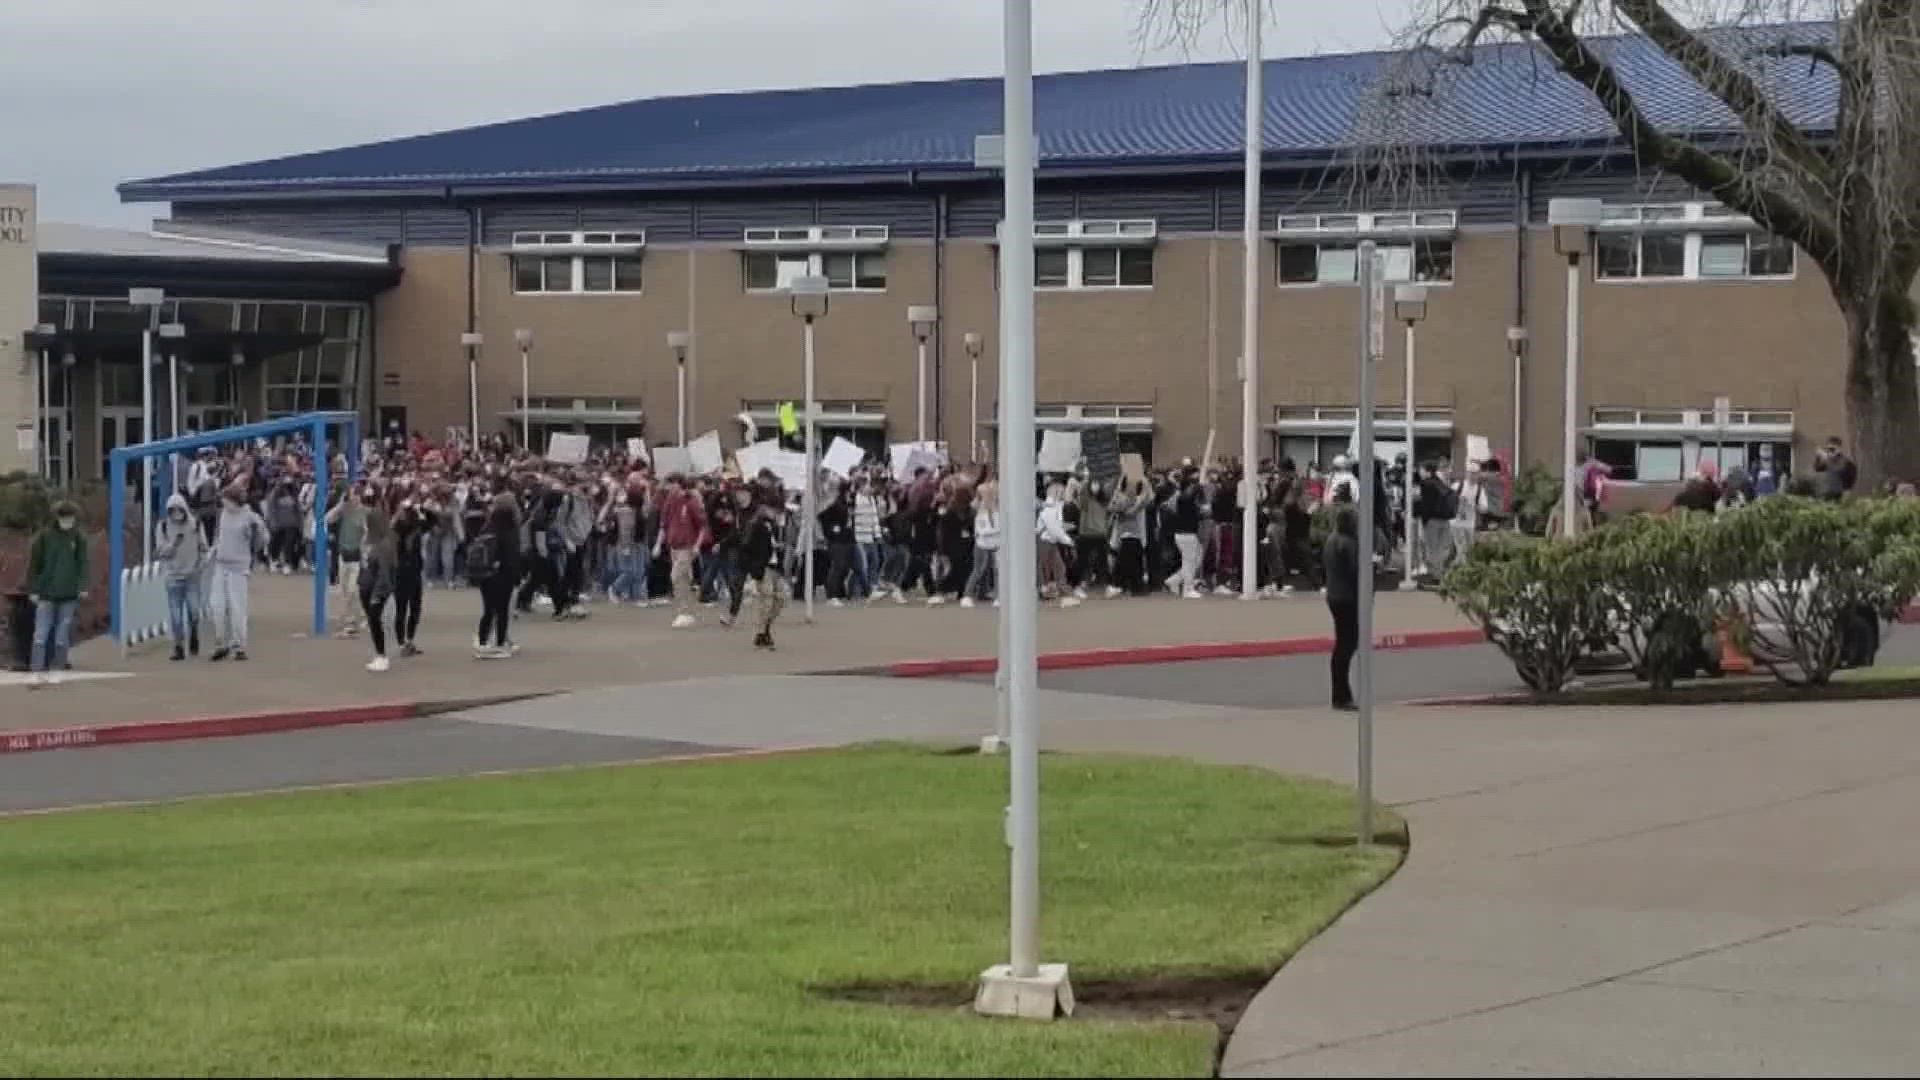 Students at Oregon City High School staged a walkout over a video shown during an assembly that was meant to speak to mental health struggles.